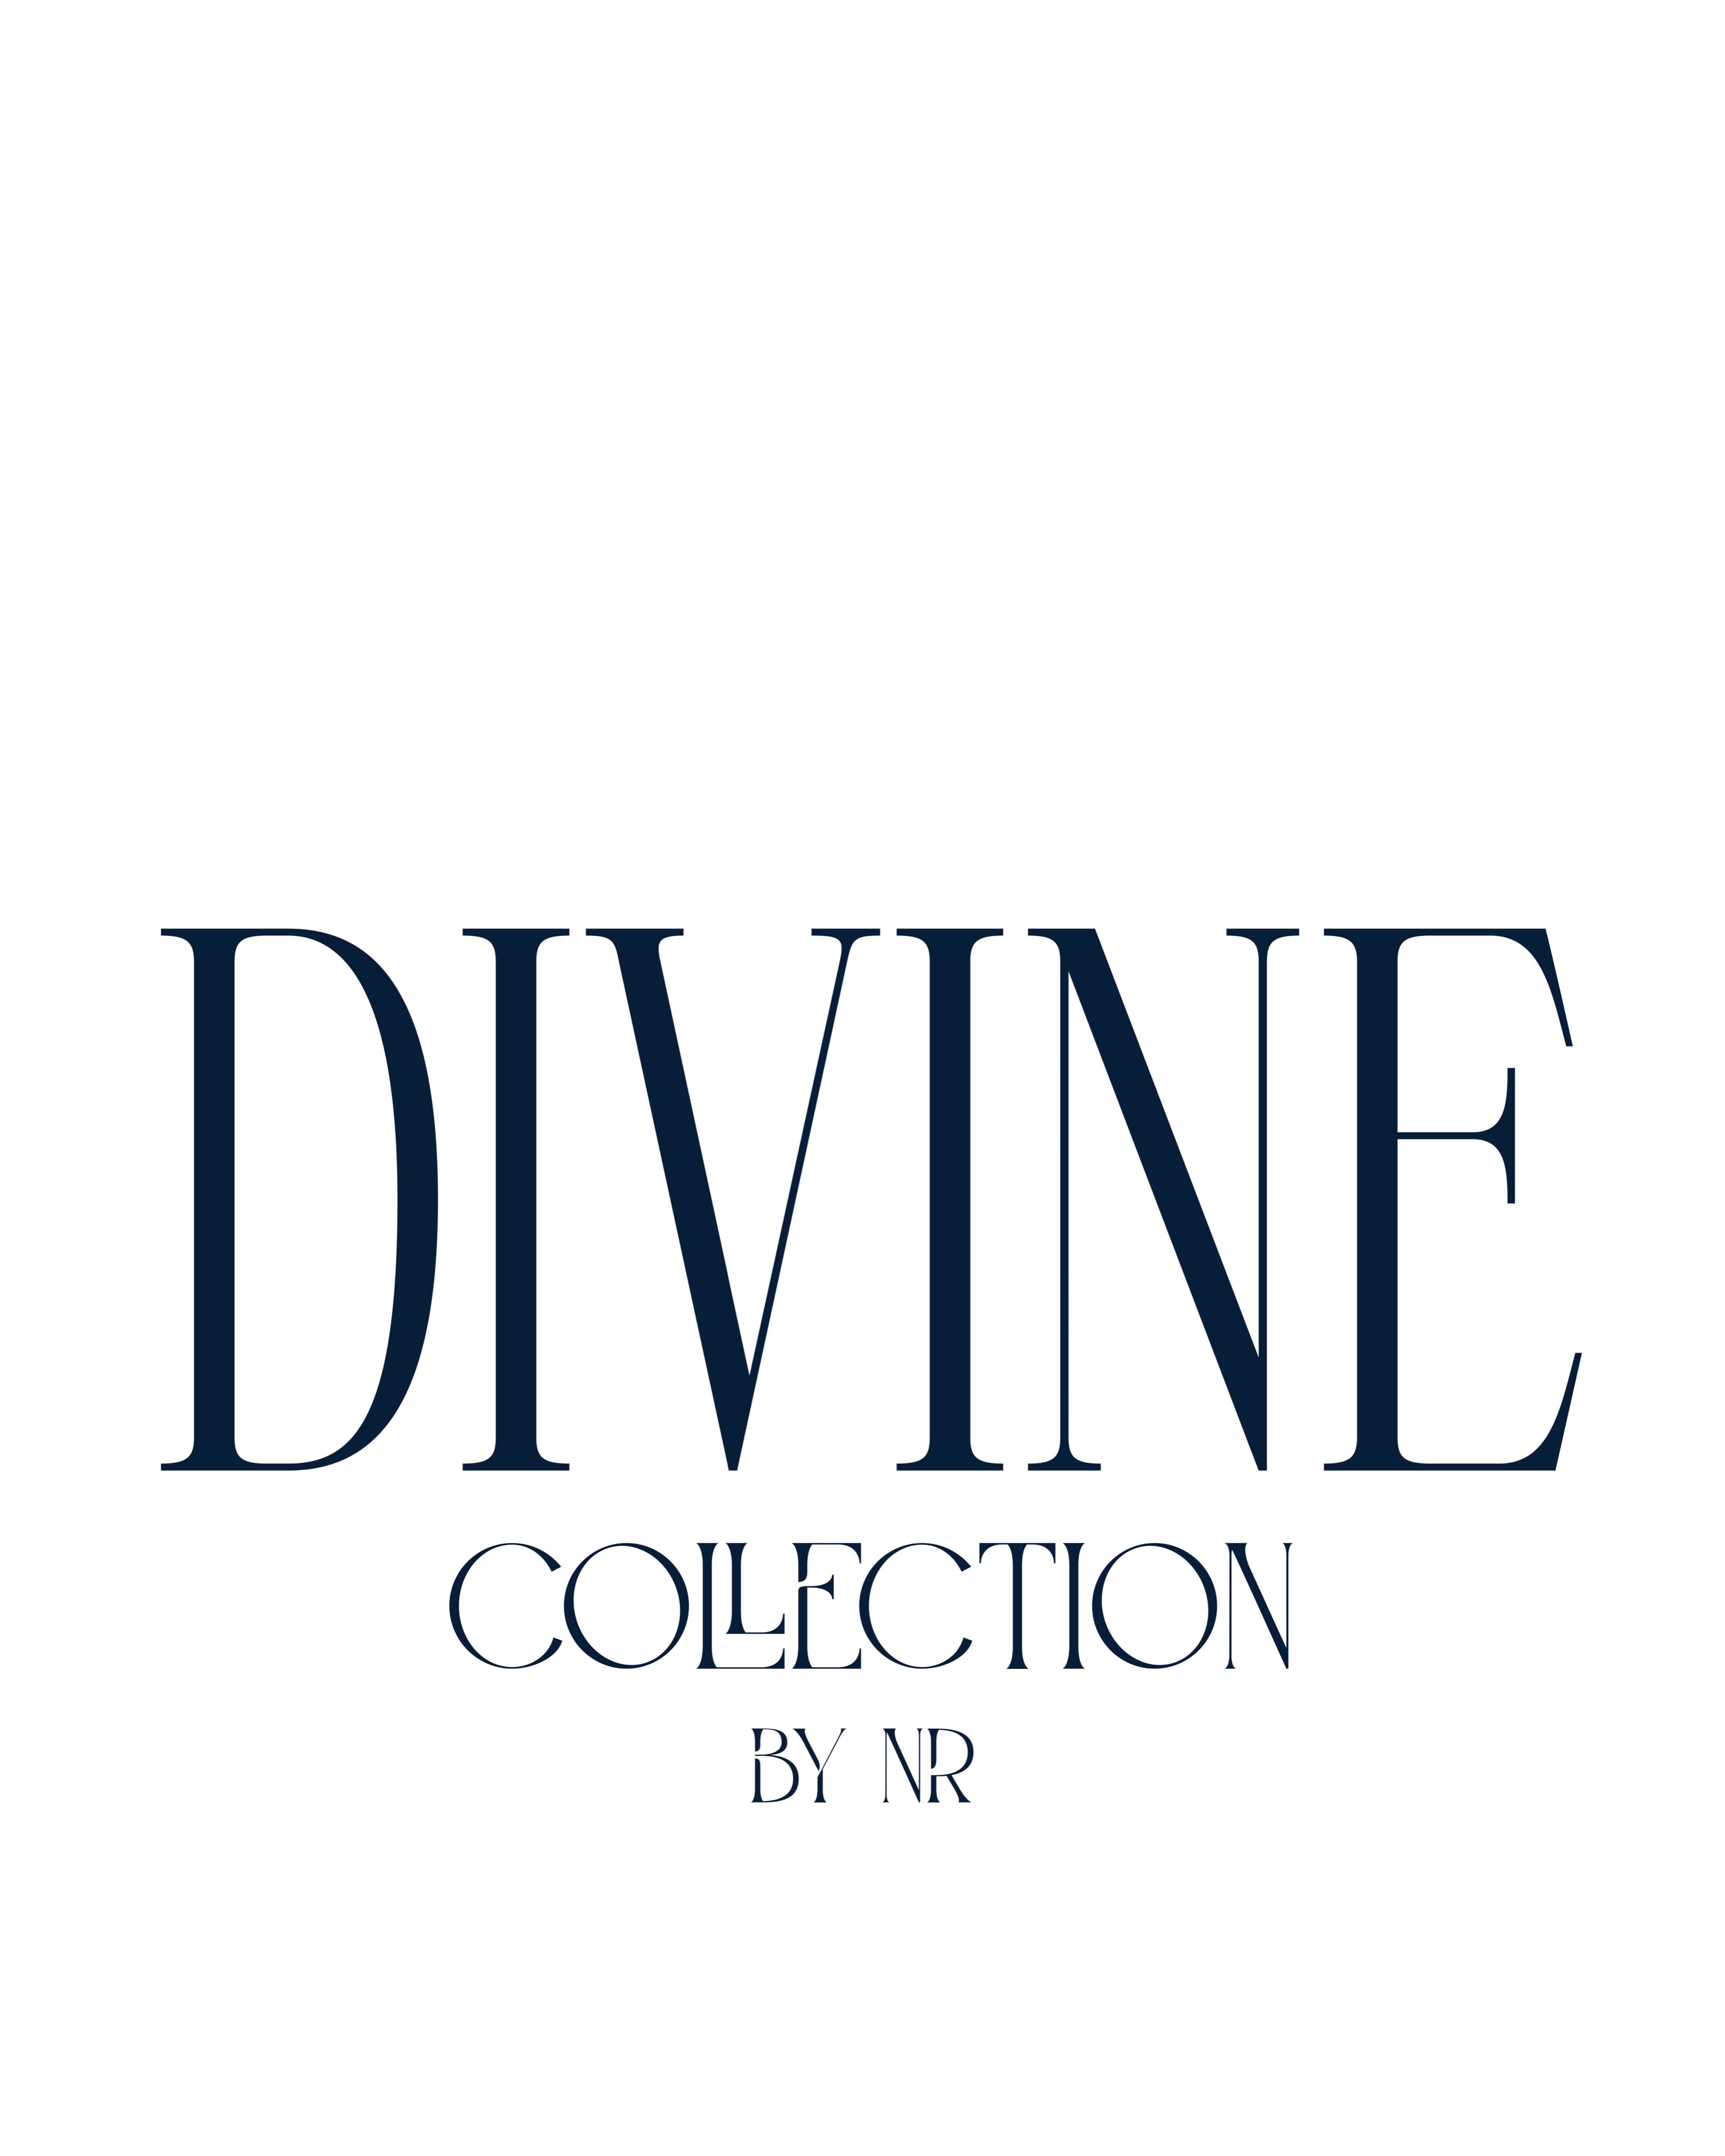 DIVINE COLLECTION BY NR